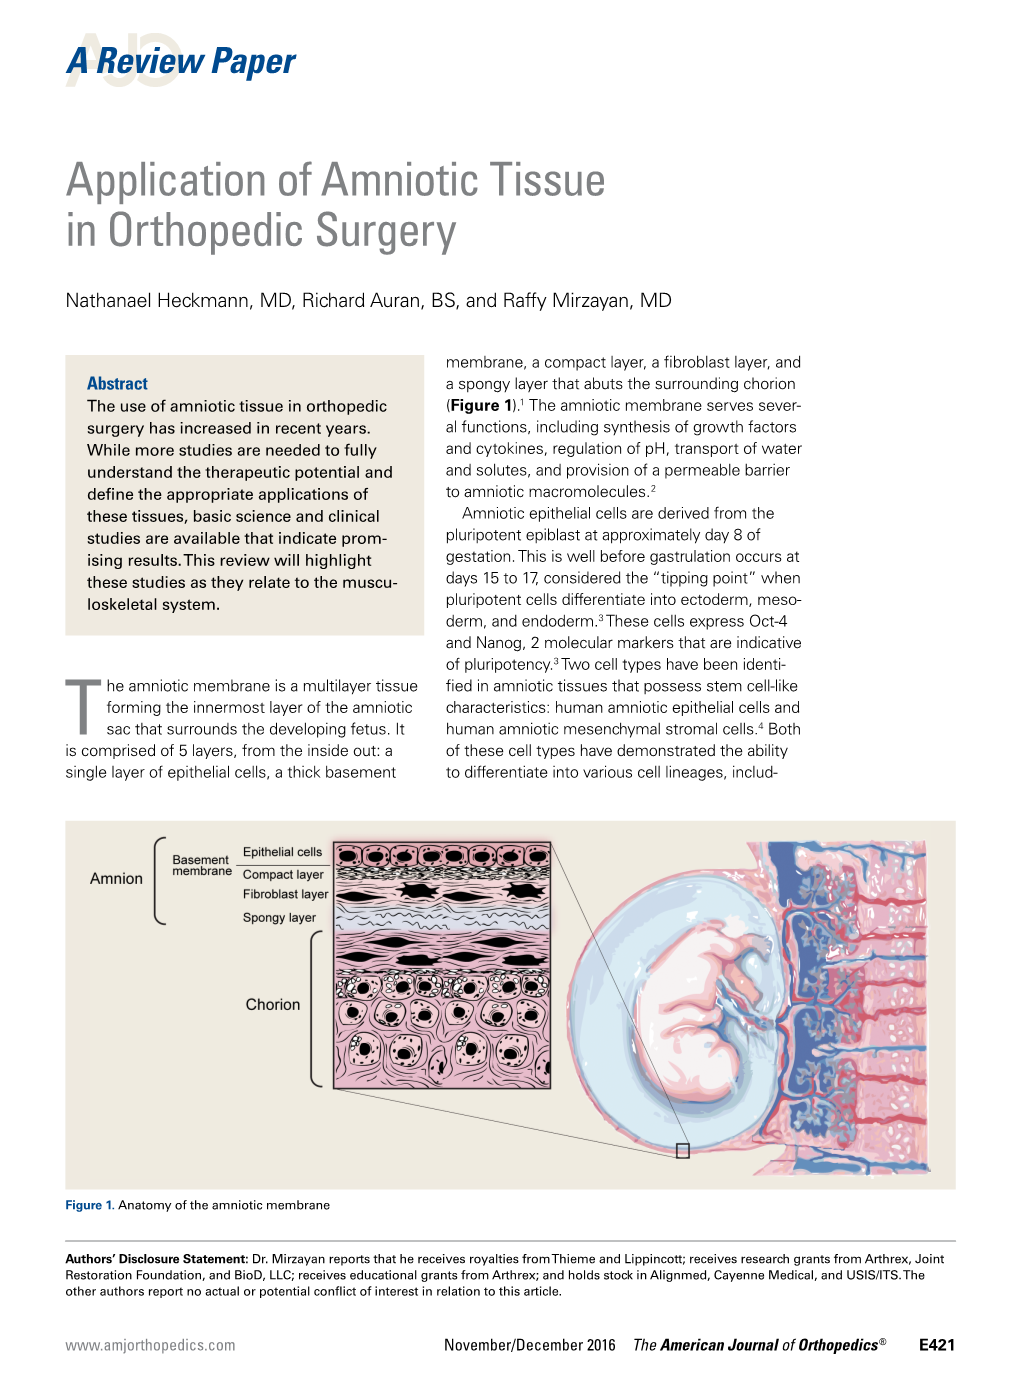 Application of Amniotic Tissue in Orthopedic Surgery